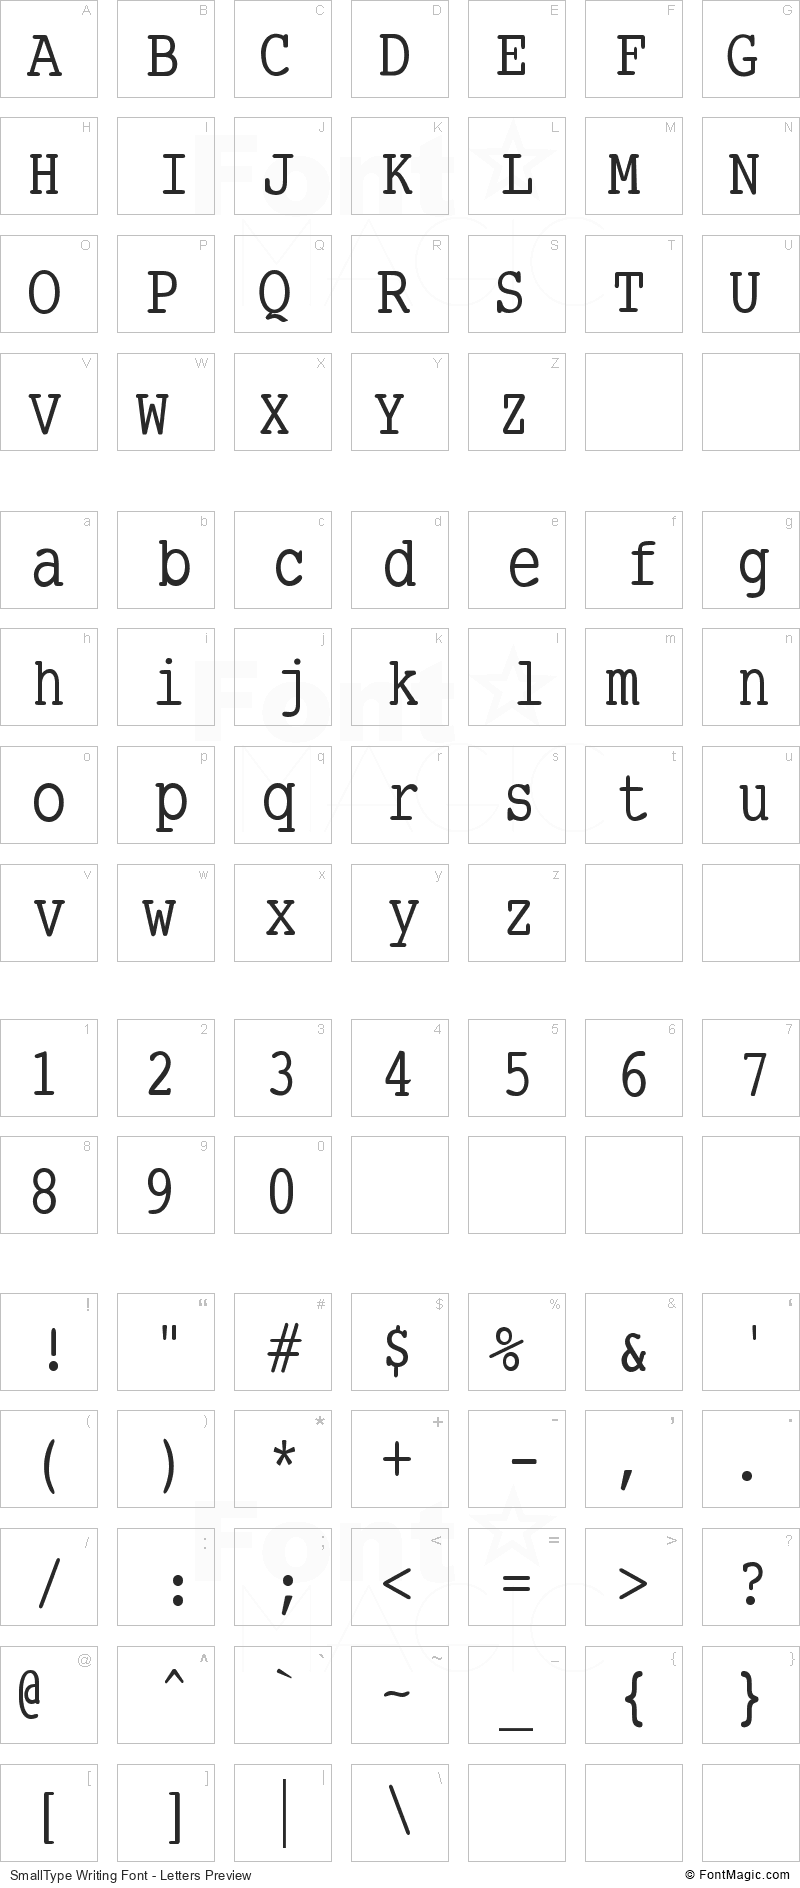 SmallType Writing Font - All Latters Preview Chart